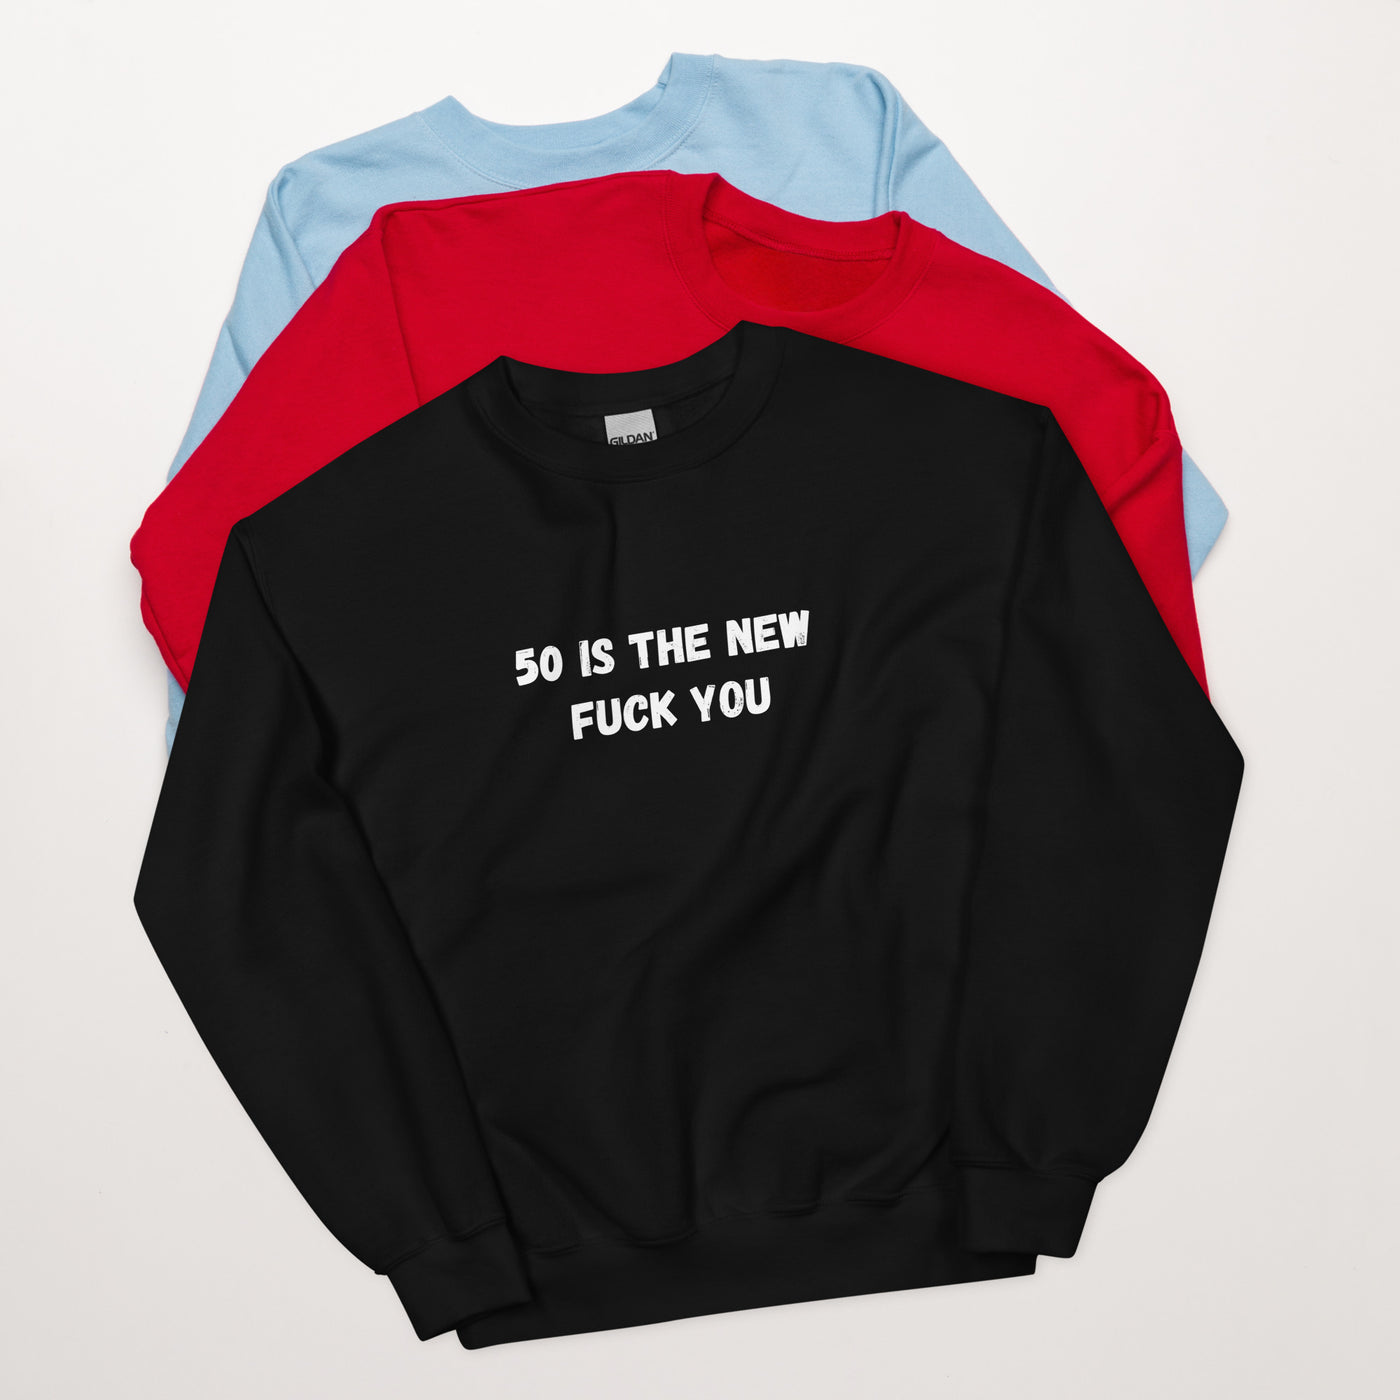 50 Is The New F Word - Simple Design Black Sweatshirt *READ DESCRIPTION FOR SHIPPING INFORMATION*